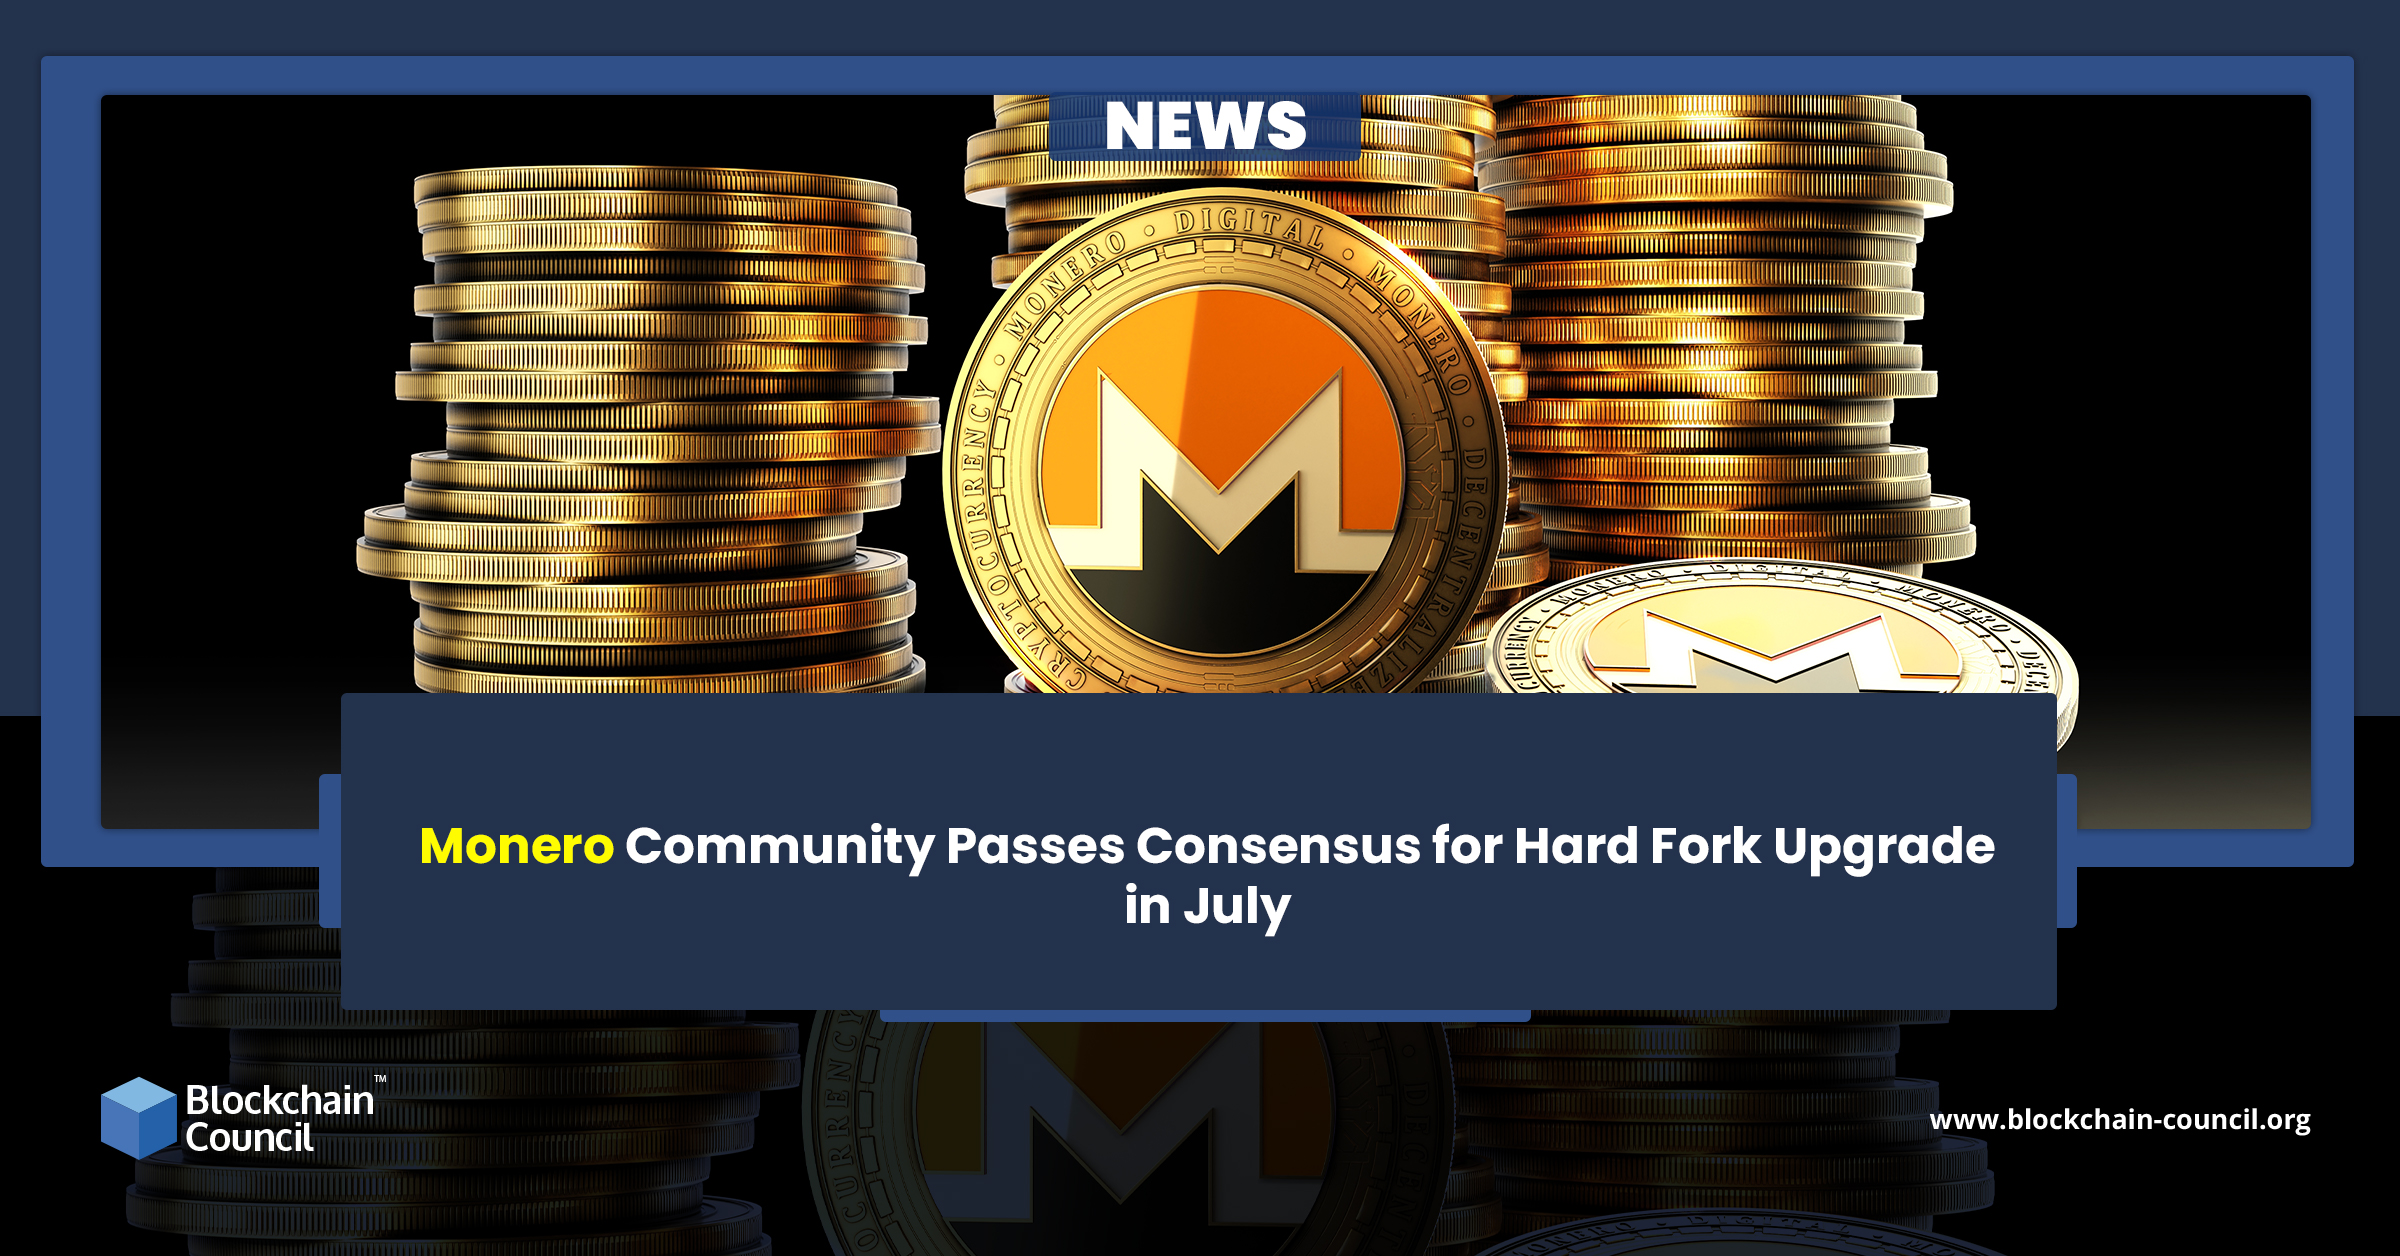 Monero Community Passes Consensus for Hard Fork Upgrade in July